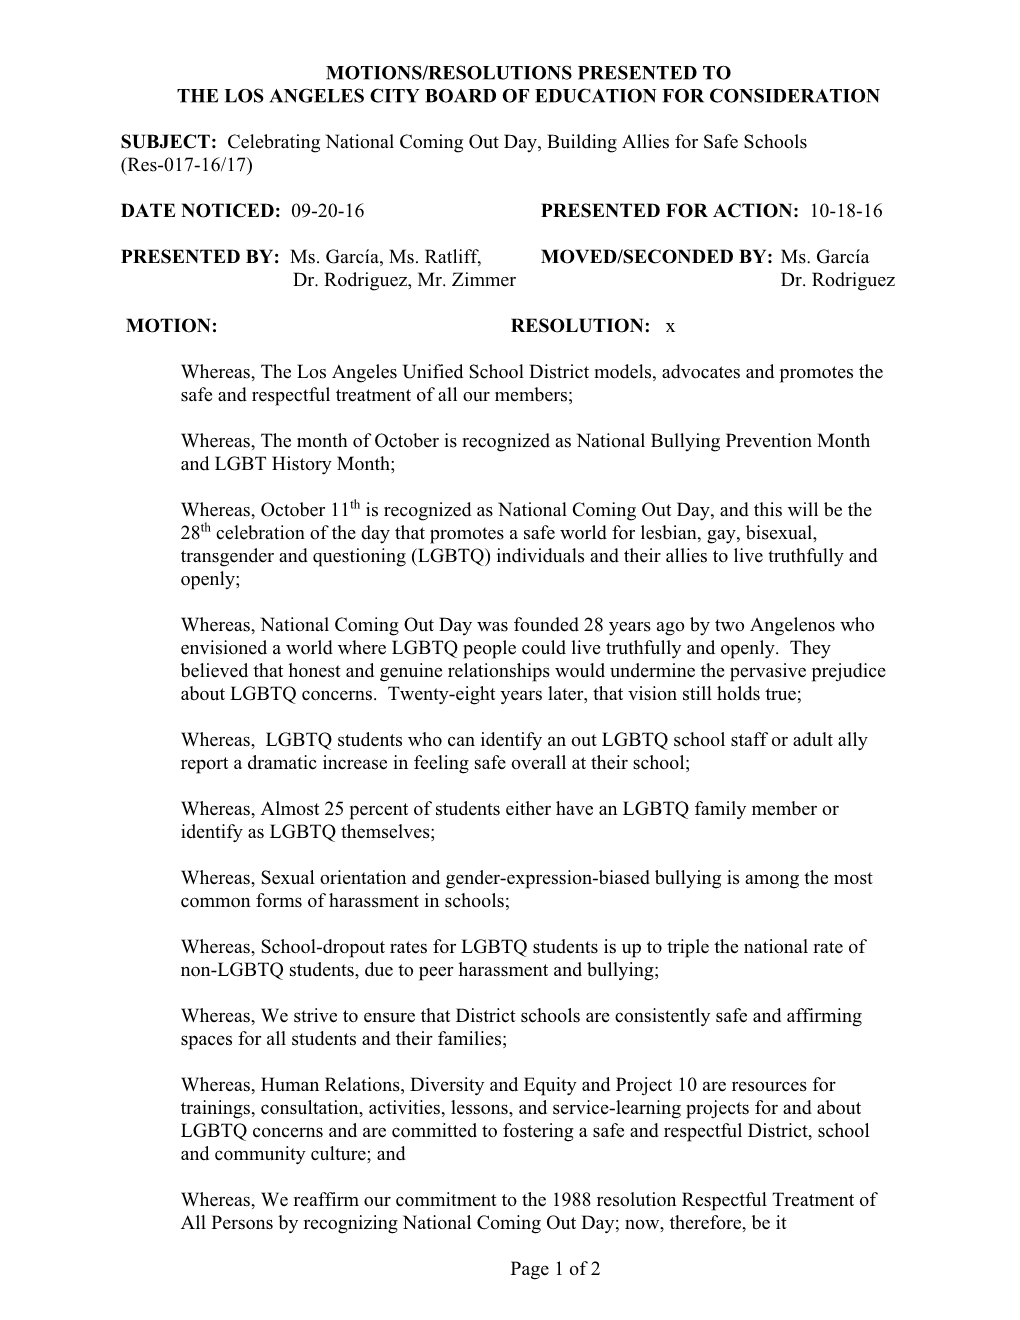 Motions/Resolutions Presented to the Los Angeles City Board of Education for Consideration